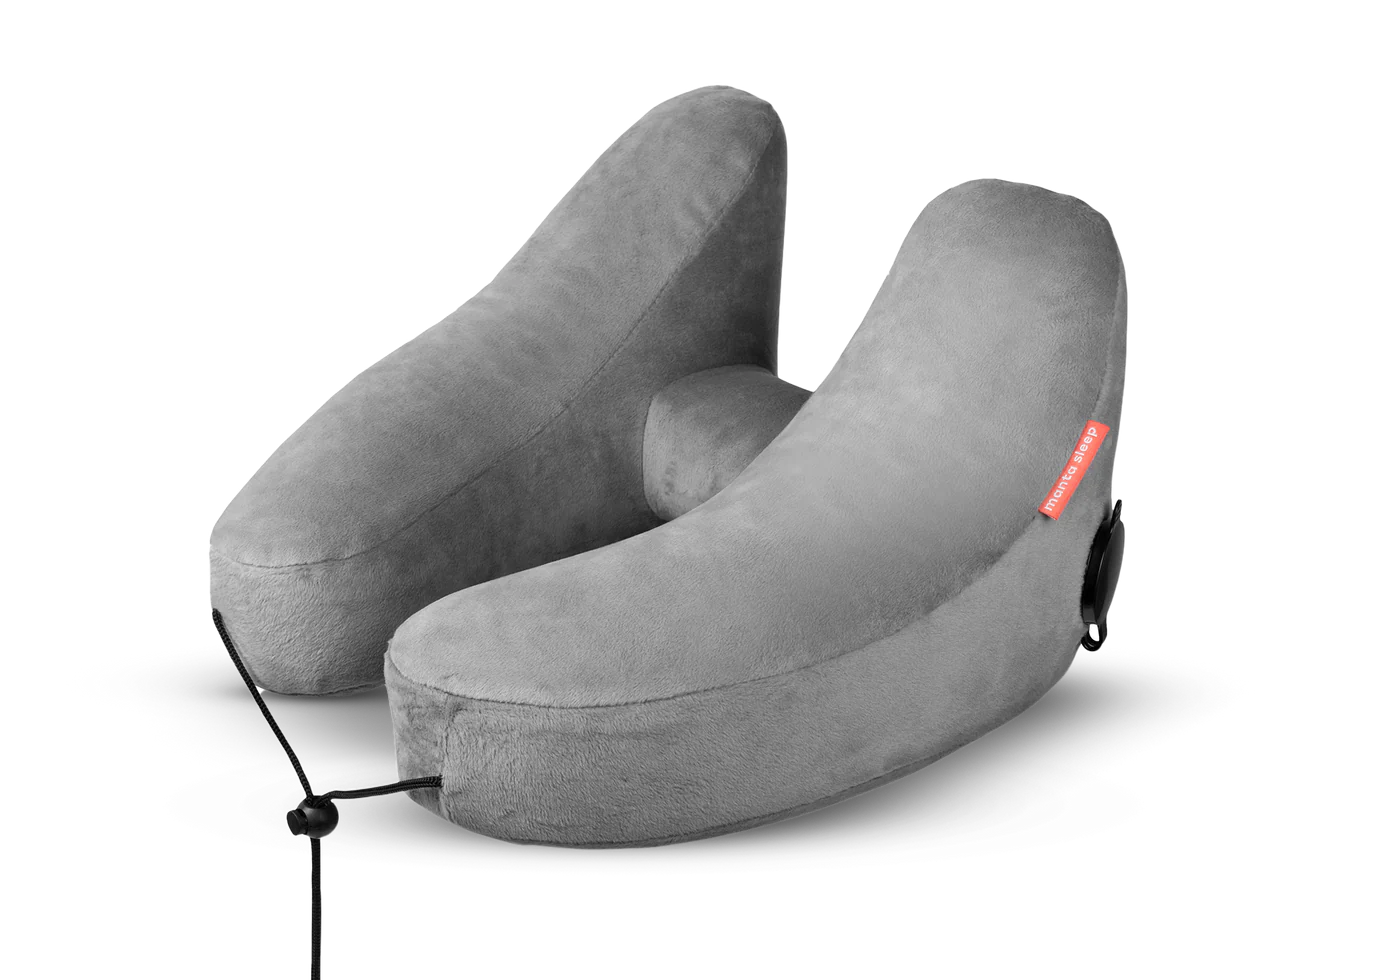 A gray inflatable nap pillow for travel.